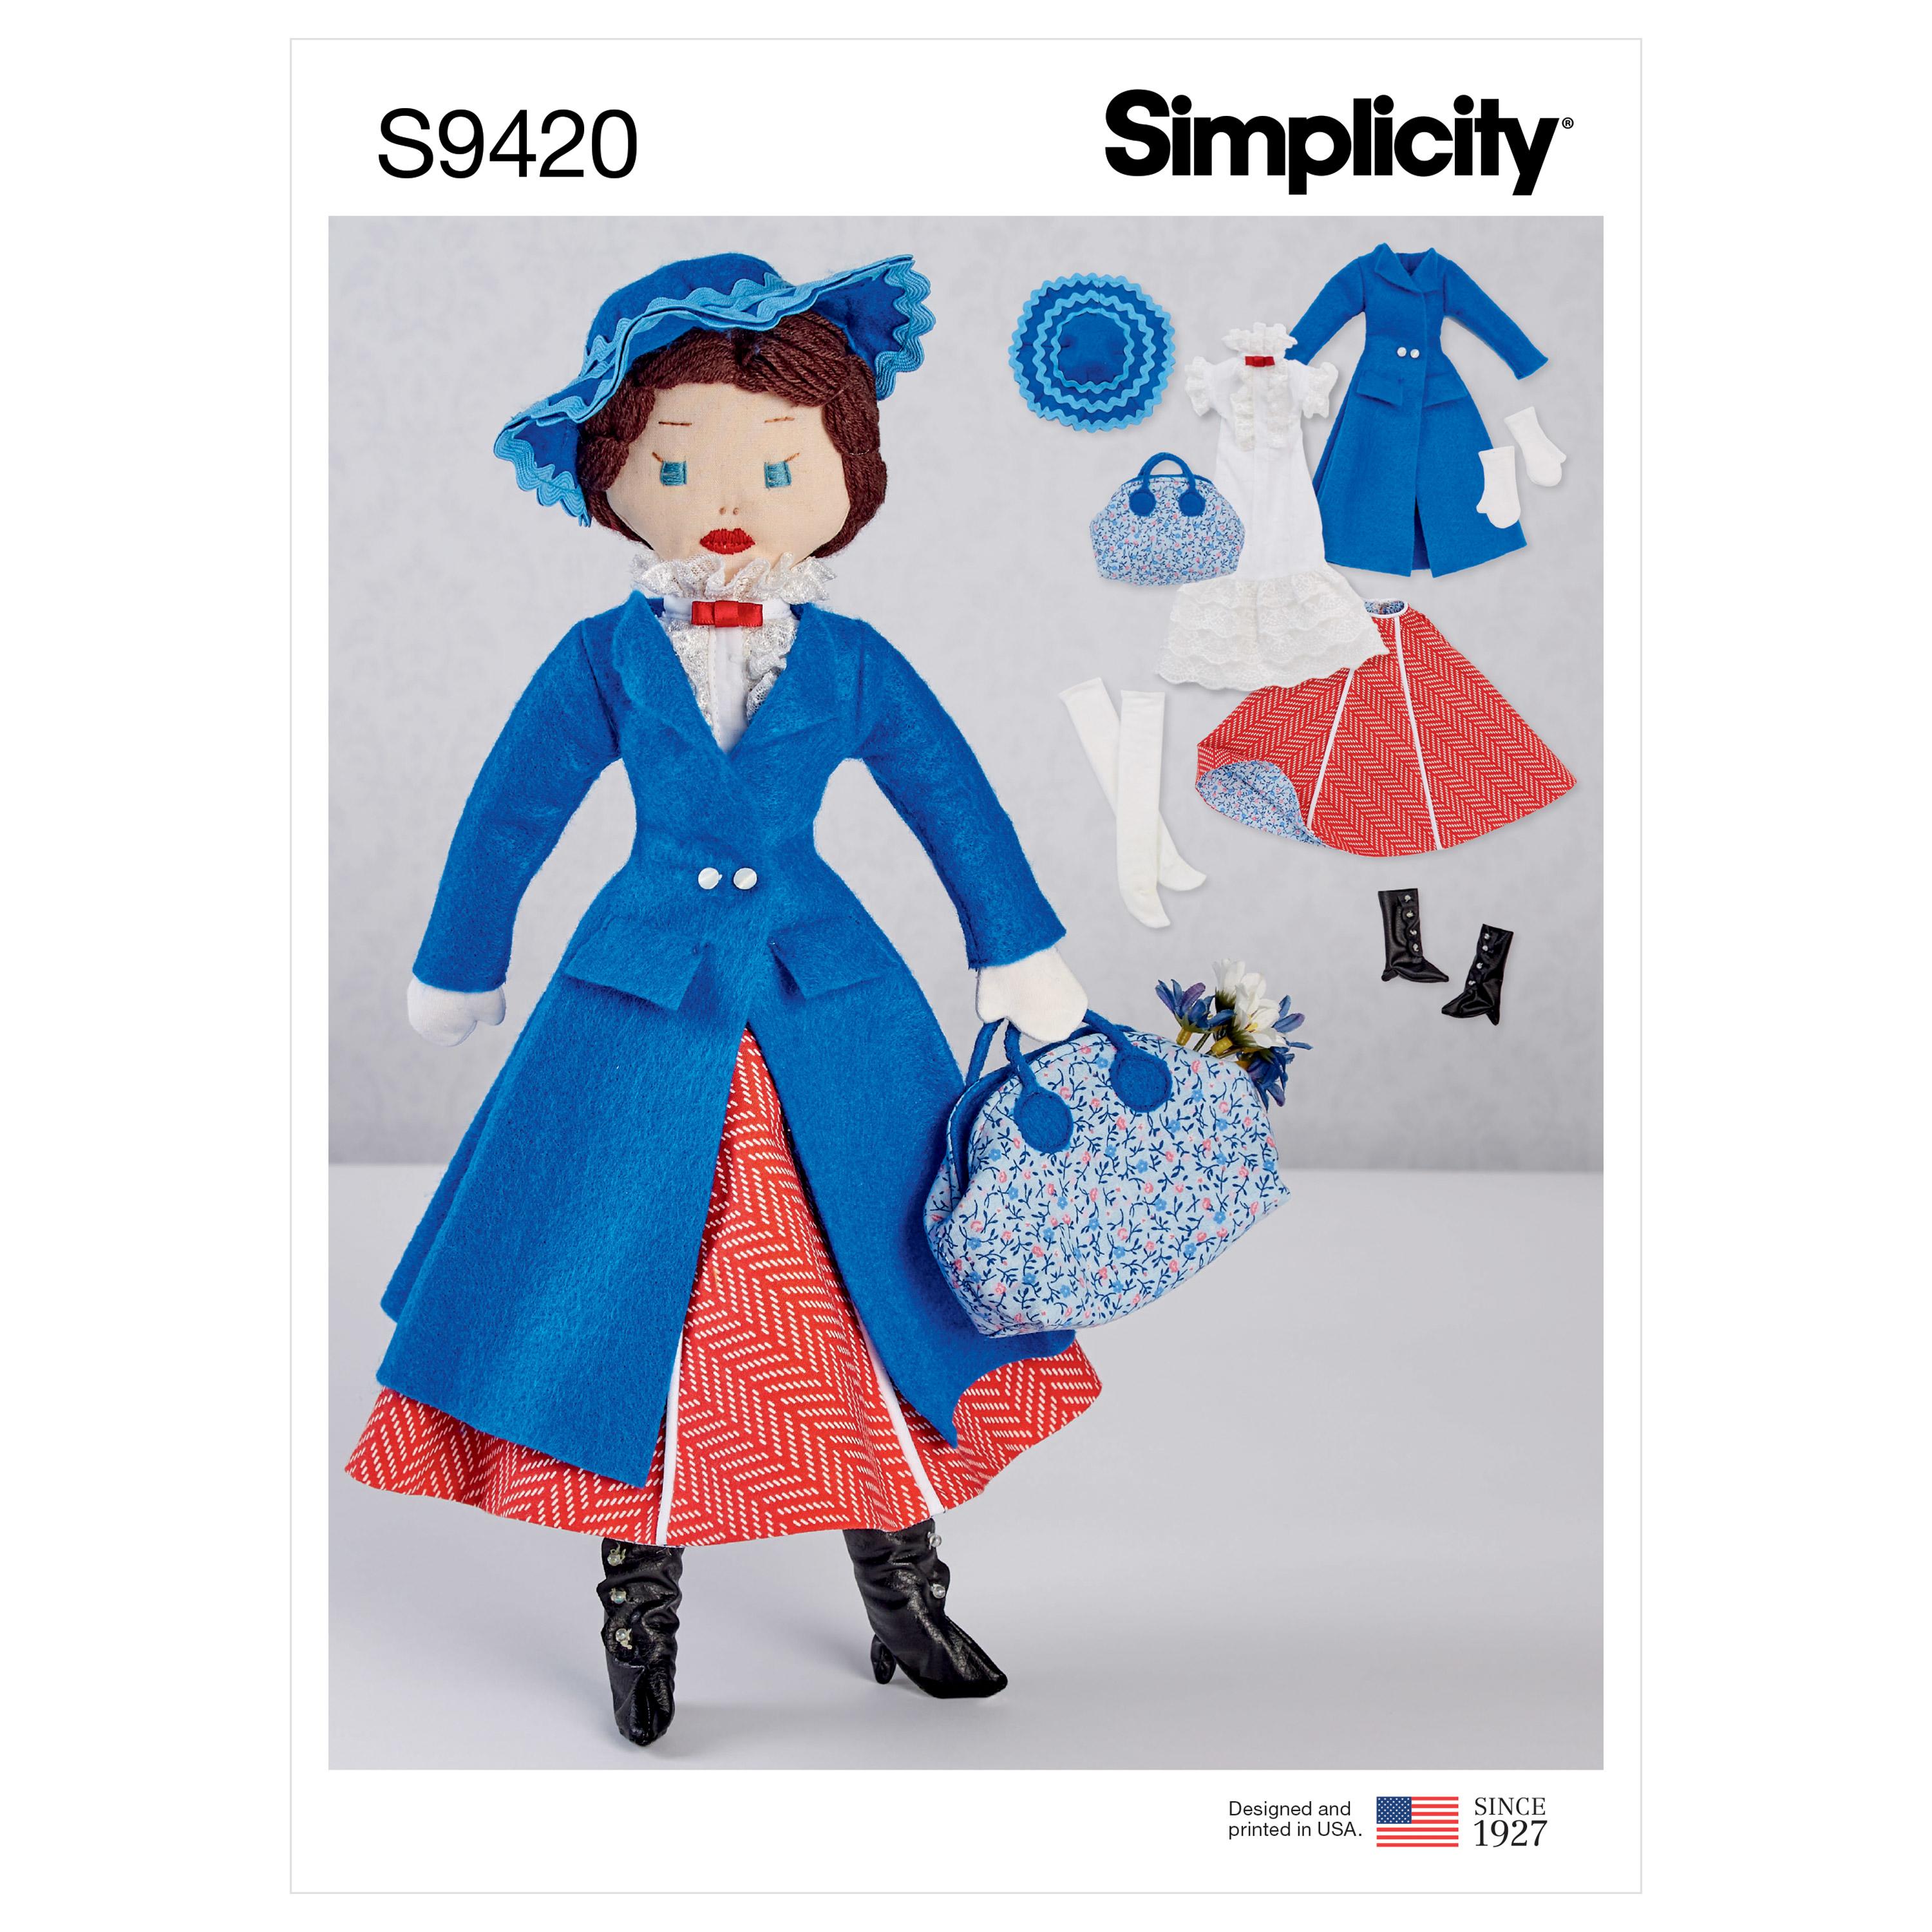 Simplicity Sewing Pattern S9420 17" Stuffed Doll and Clothes